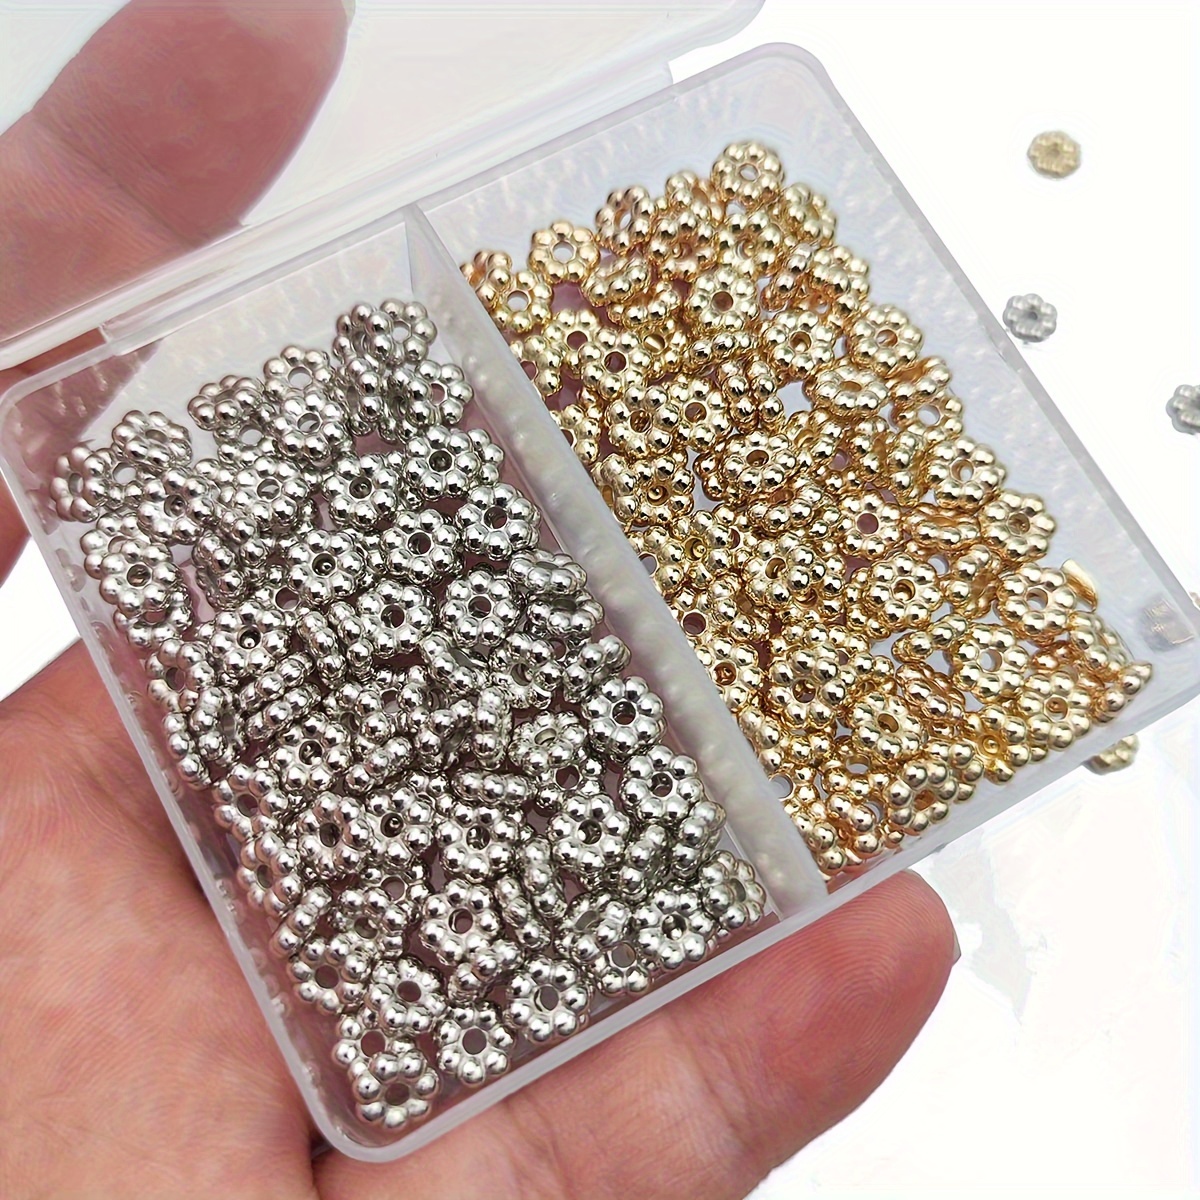 400pcs 2 Colors 304 Stainless Steel Spacer Beads Smooth Loose Rondelle Beads Stopper Beads Metal Crimp Bead for Necklace Bracelet Earring Making